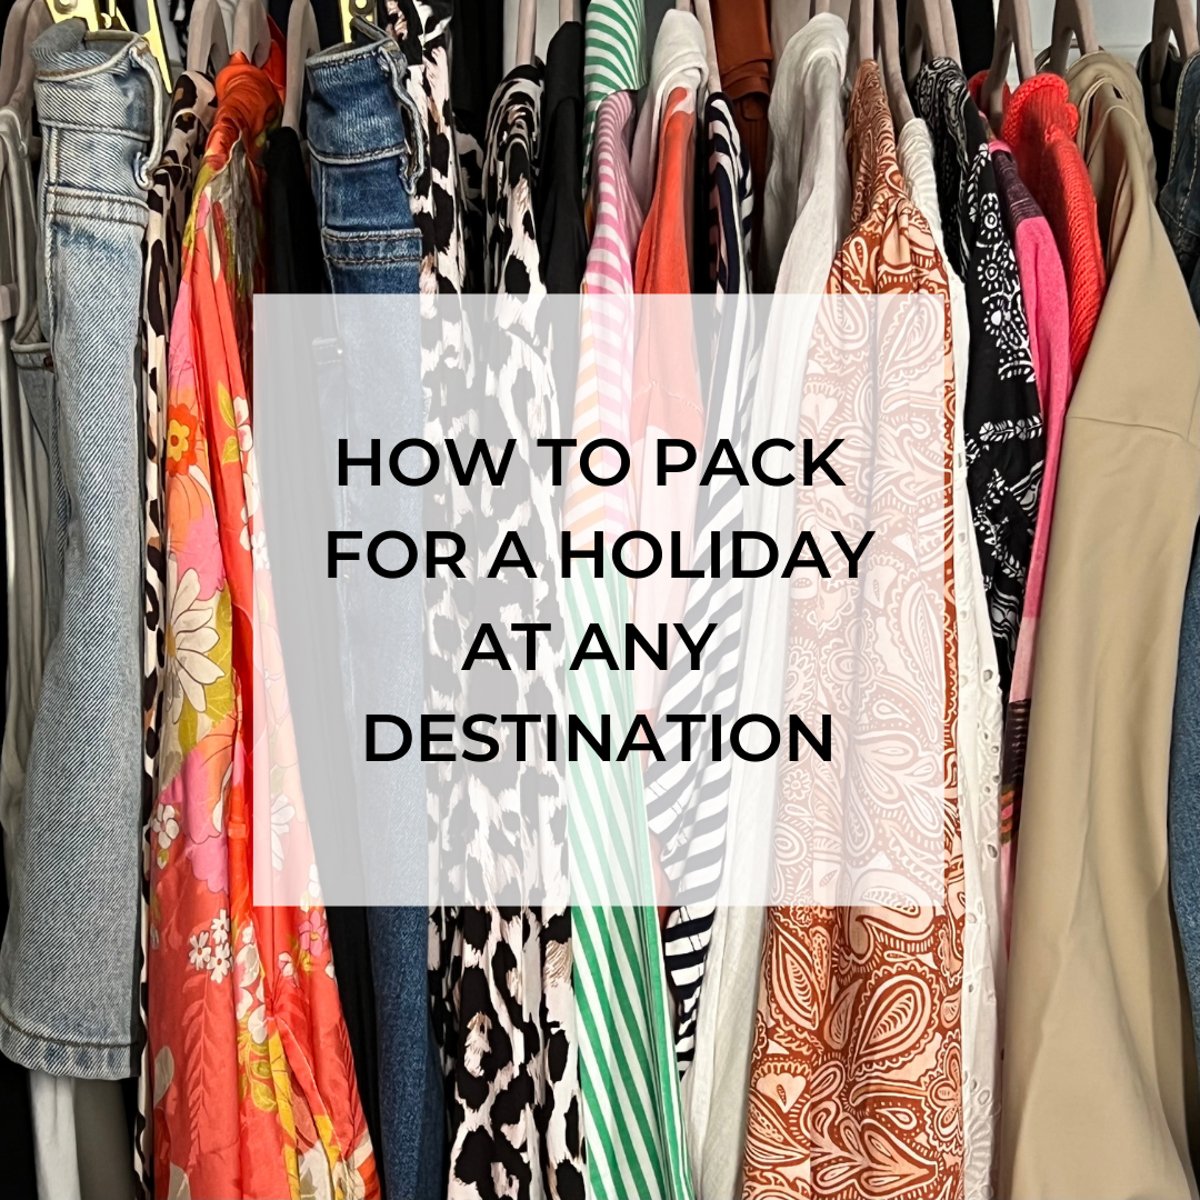 How to pack for a holiday at any destination